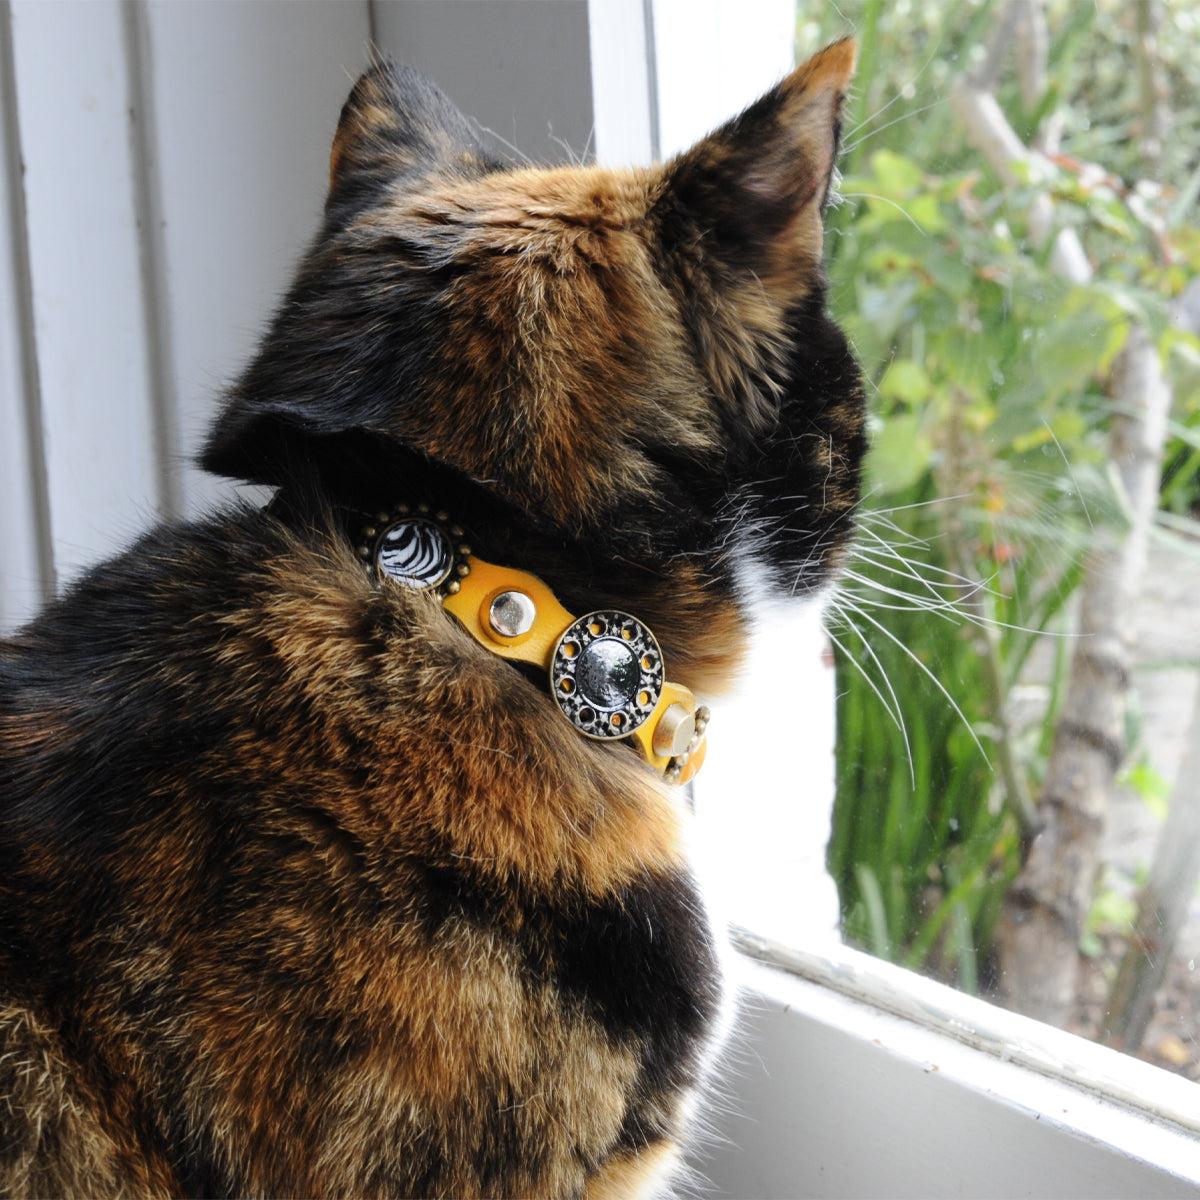 Superpipapo Luxury Leather Cat Collar, In Black & Yellow With Studs, Spikes, Stones & Hand Painted Ornaments | at Made Moggie